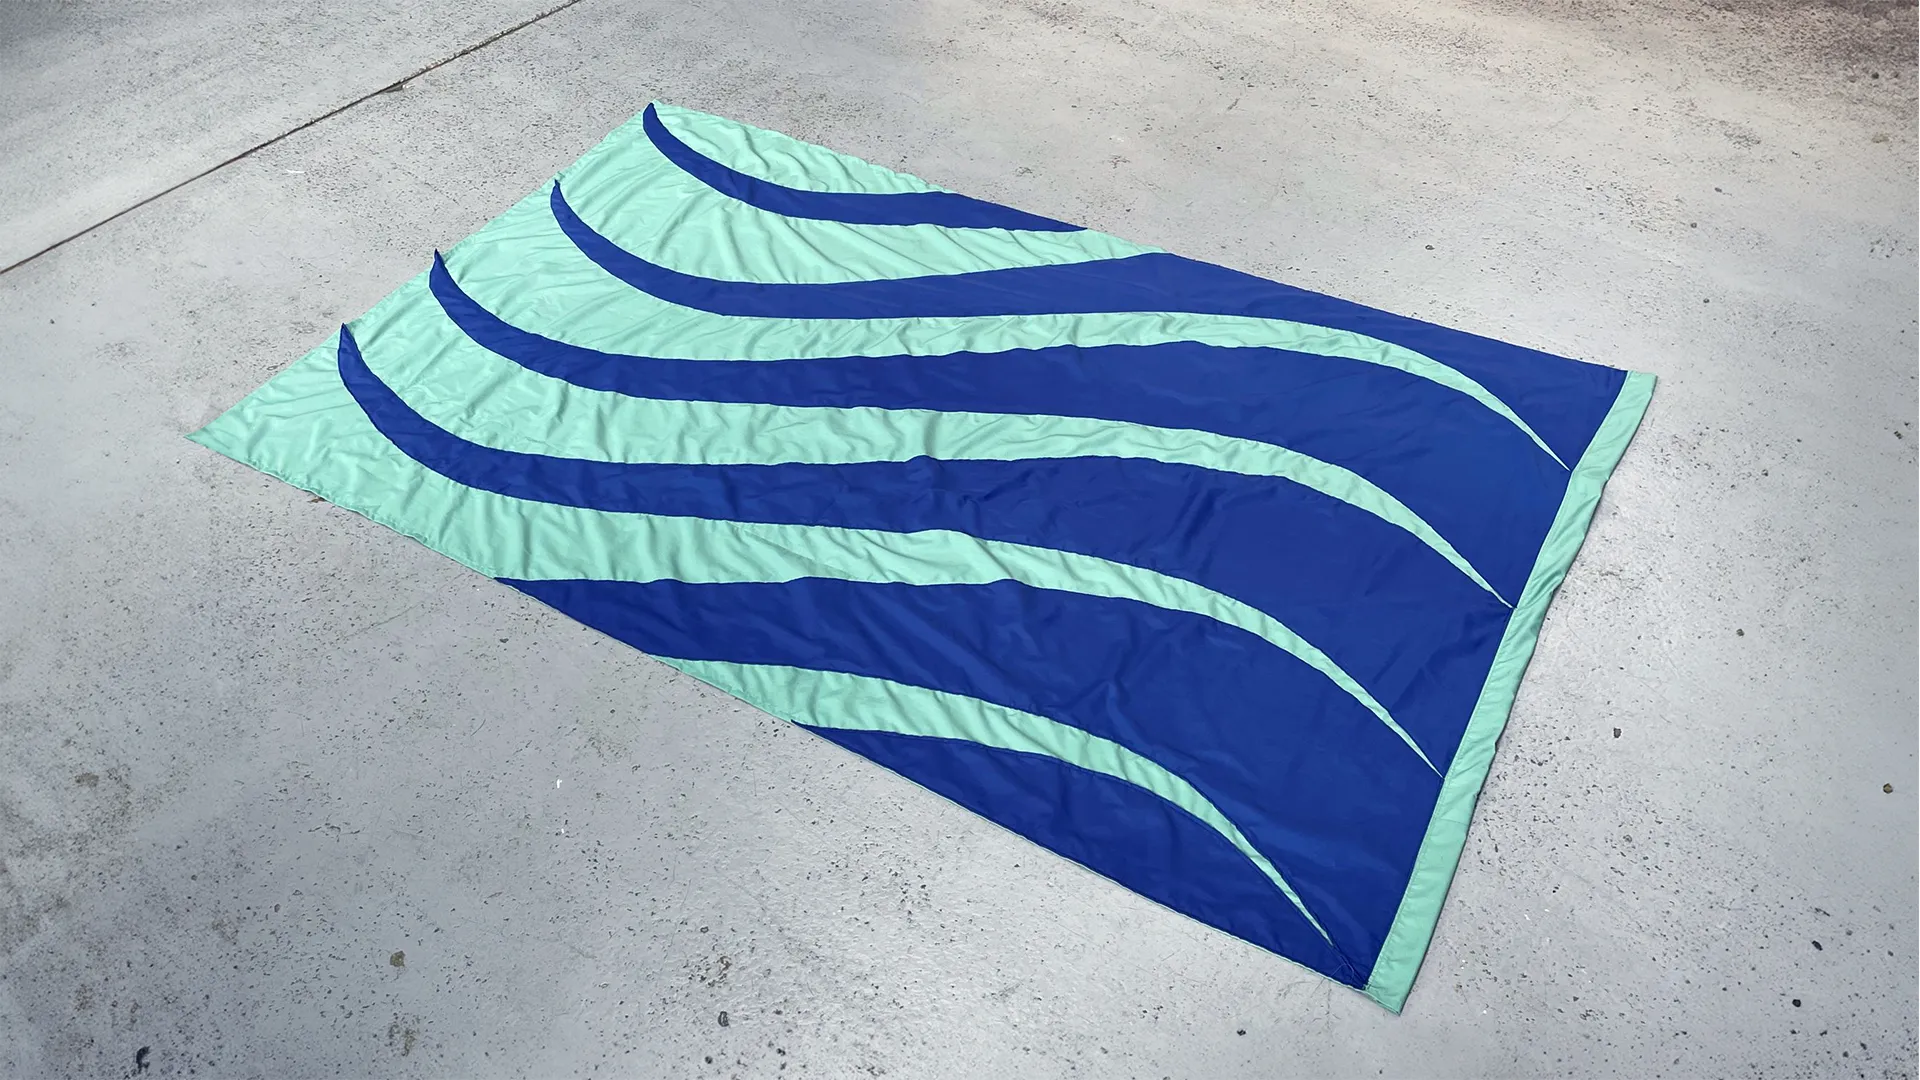 A flag on a concrete floor. The flag is seagreen and ultramarine blue waves.